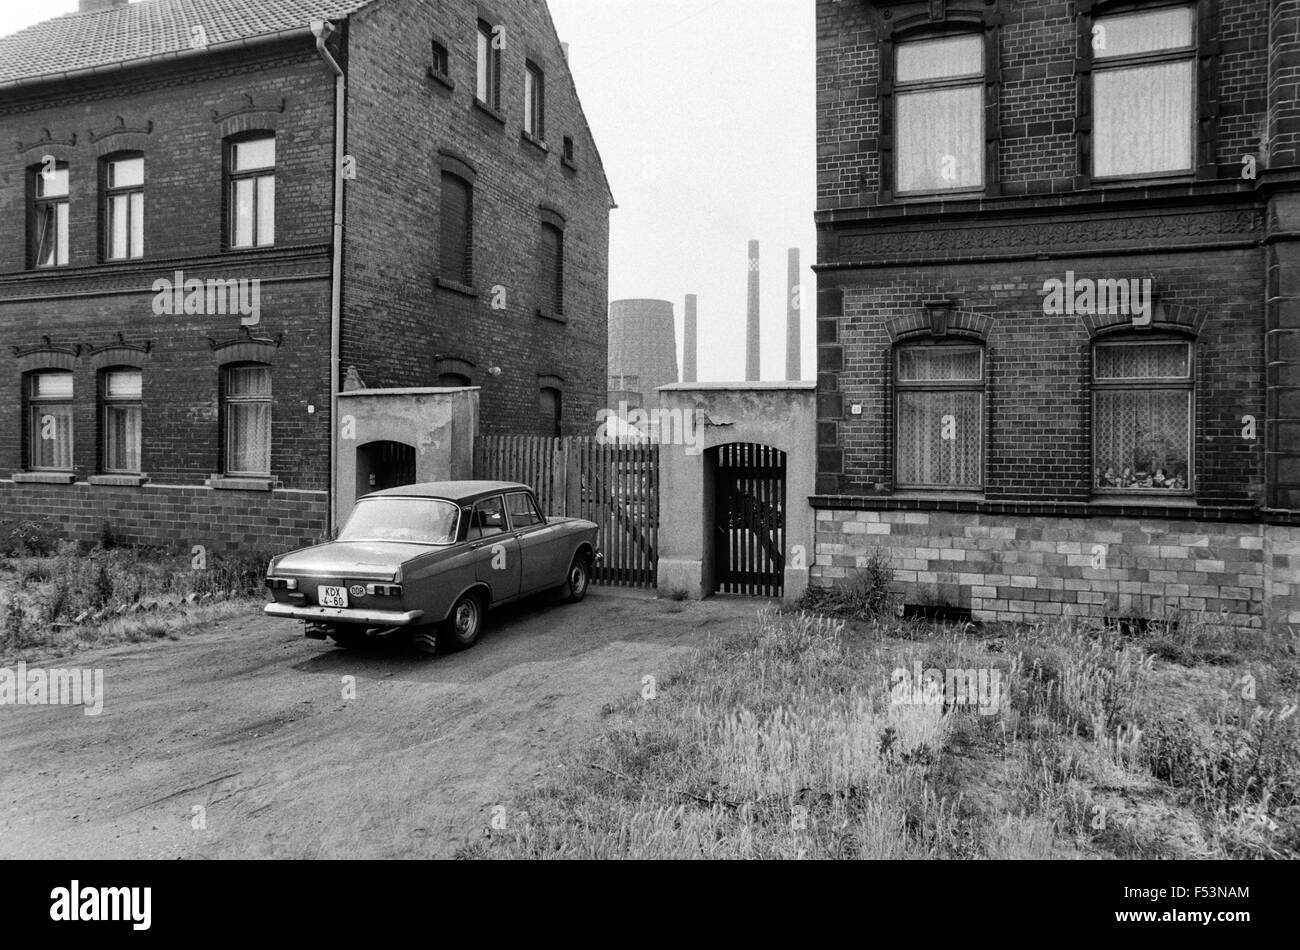 14.05.1990, Lauchhammer, Cottbus, German Democratic Republic - Residential and industrial plant in Lauchhammer. 00P900514A010CAROEX.JPG - NOT for SALE in G E R M A N Y, A U S T R I A, S W I T Z E R L A N D [MODEL RELEASE: NOT APPLICABLE, PROPERTY RELEASE: NO (c) caro photo agency / Muhs, http://www.caro-images.pl, info@carofoto.pl - In case of using the picture for non-journalistic purposes, please contact the agency - the picture is subject to royalty!] Stock Photo